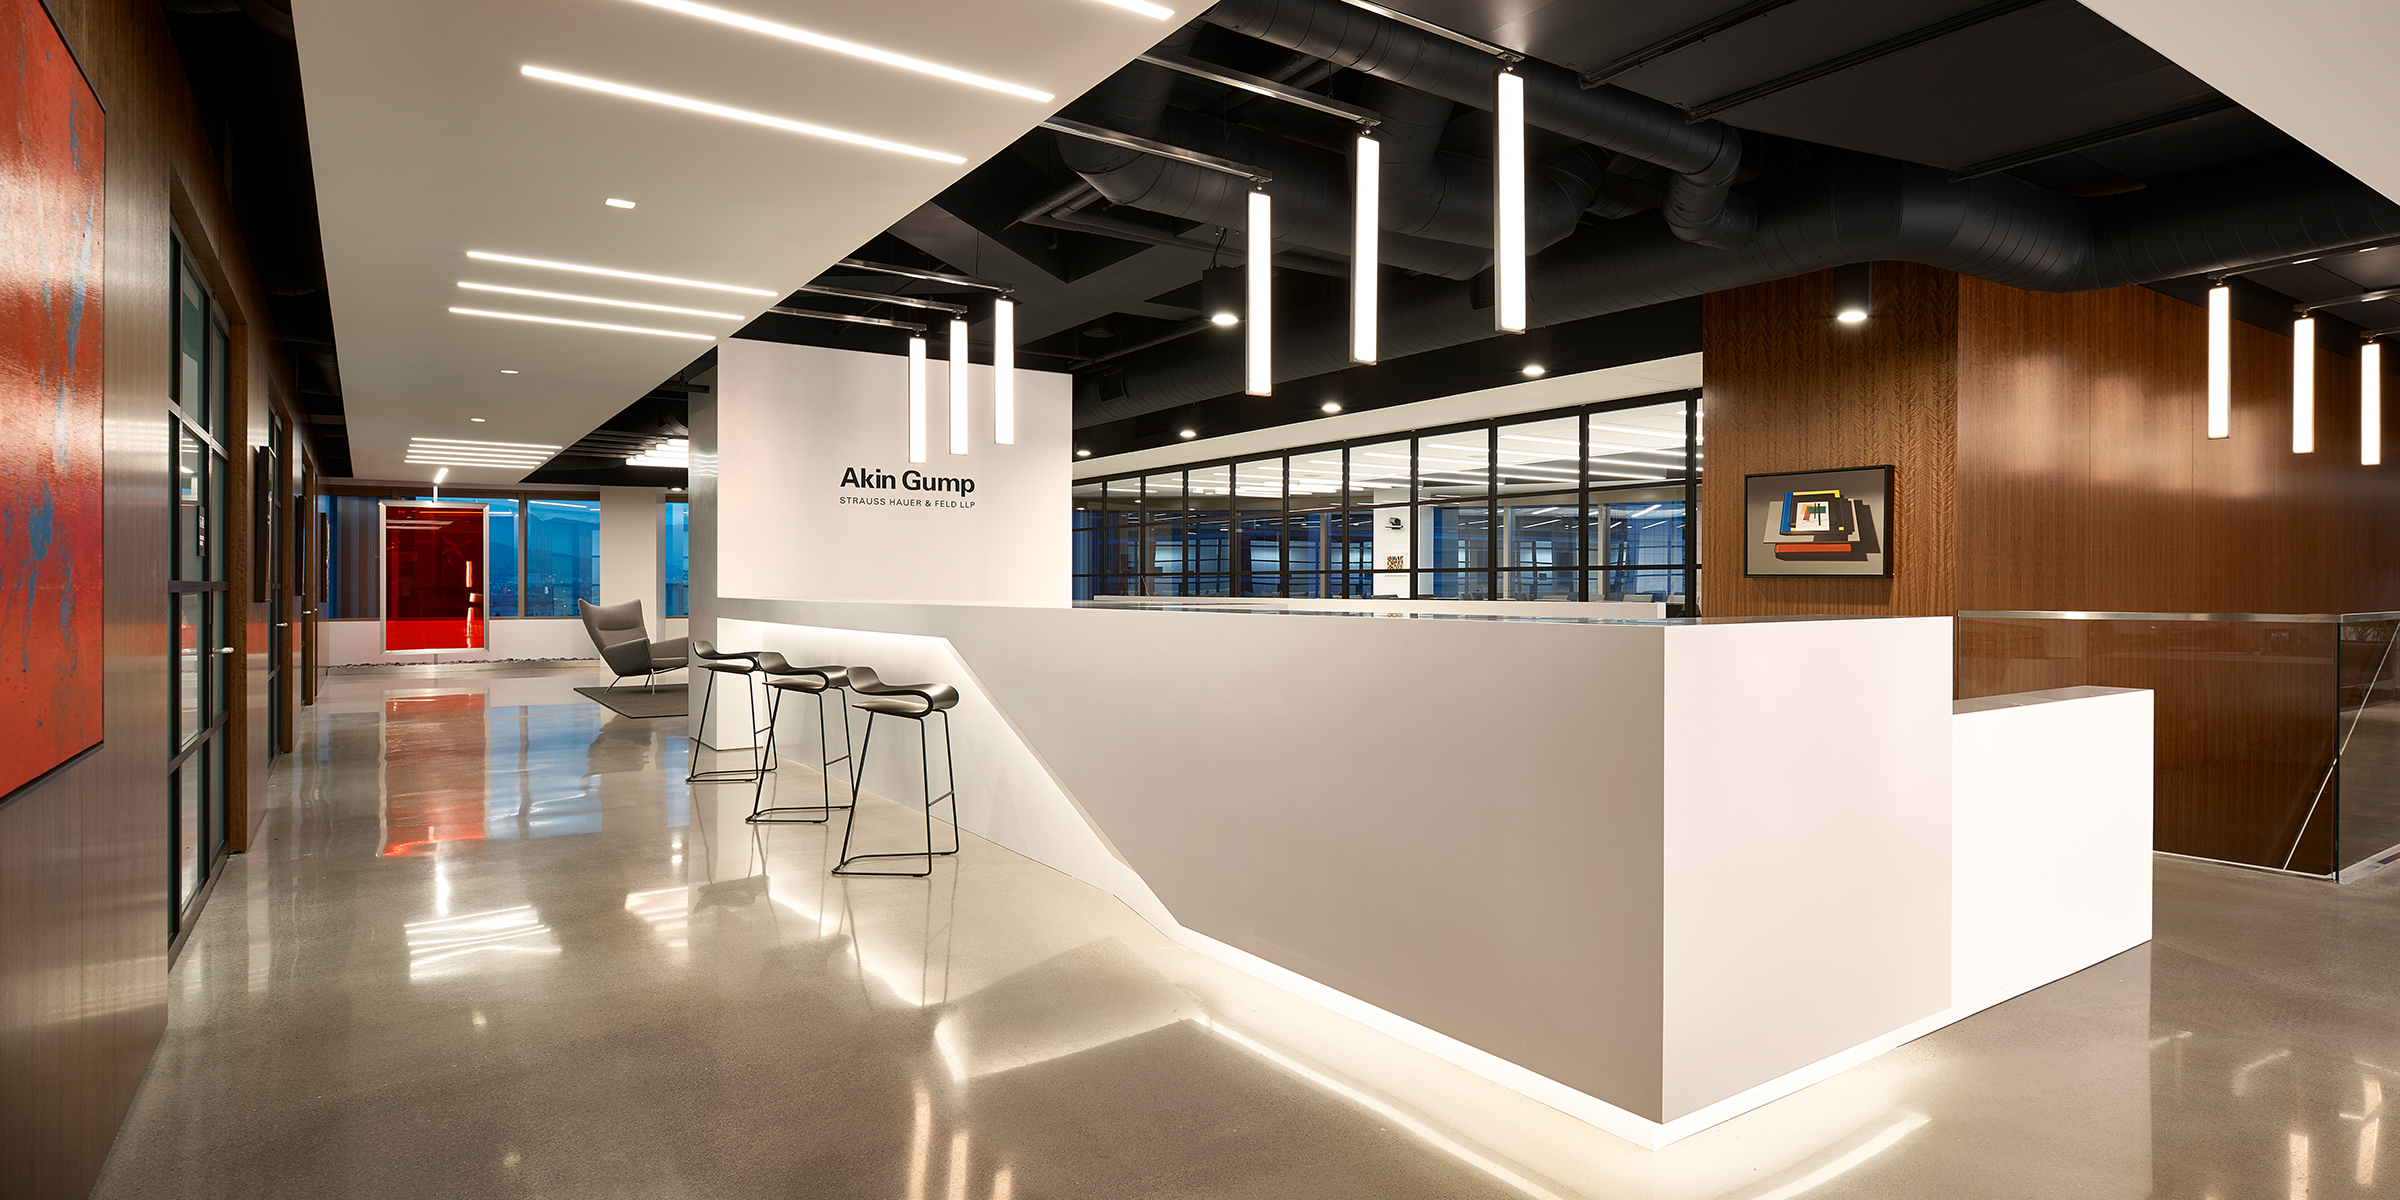 Akin Gump Office | Architect: Gensler | Swing Doors, Fixed Panels, Operable Walls |Reconfigurable Open Space Closed with Sliding Partitions